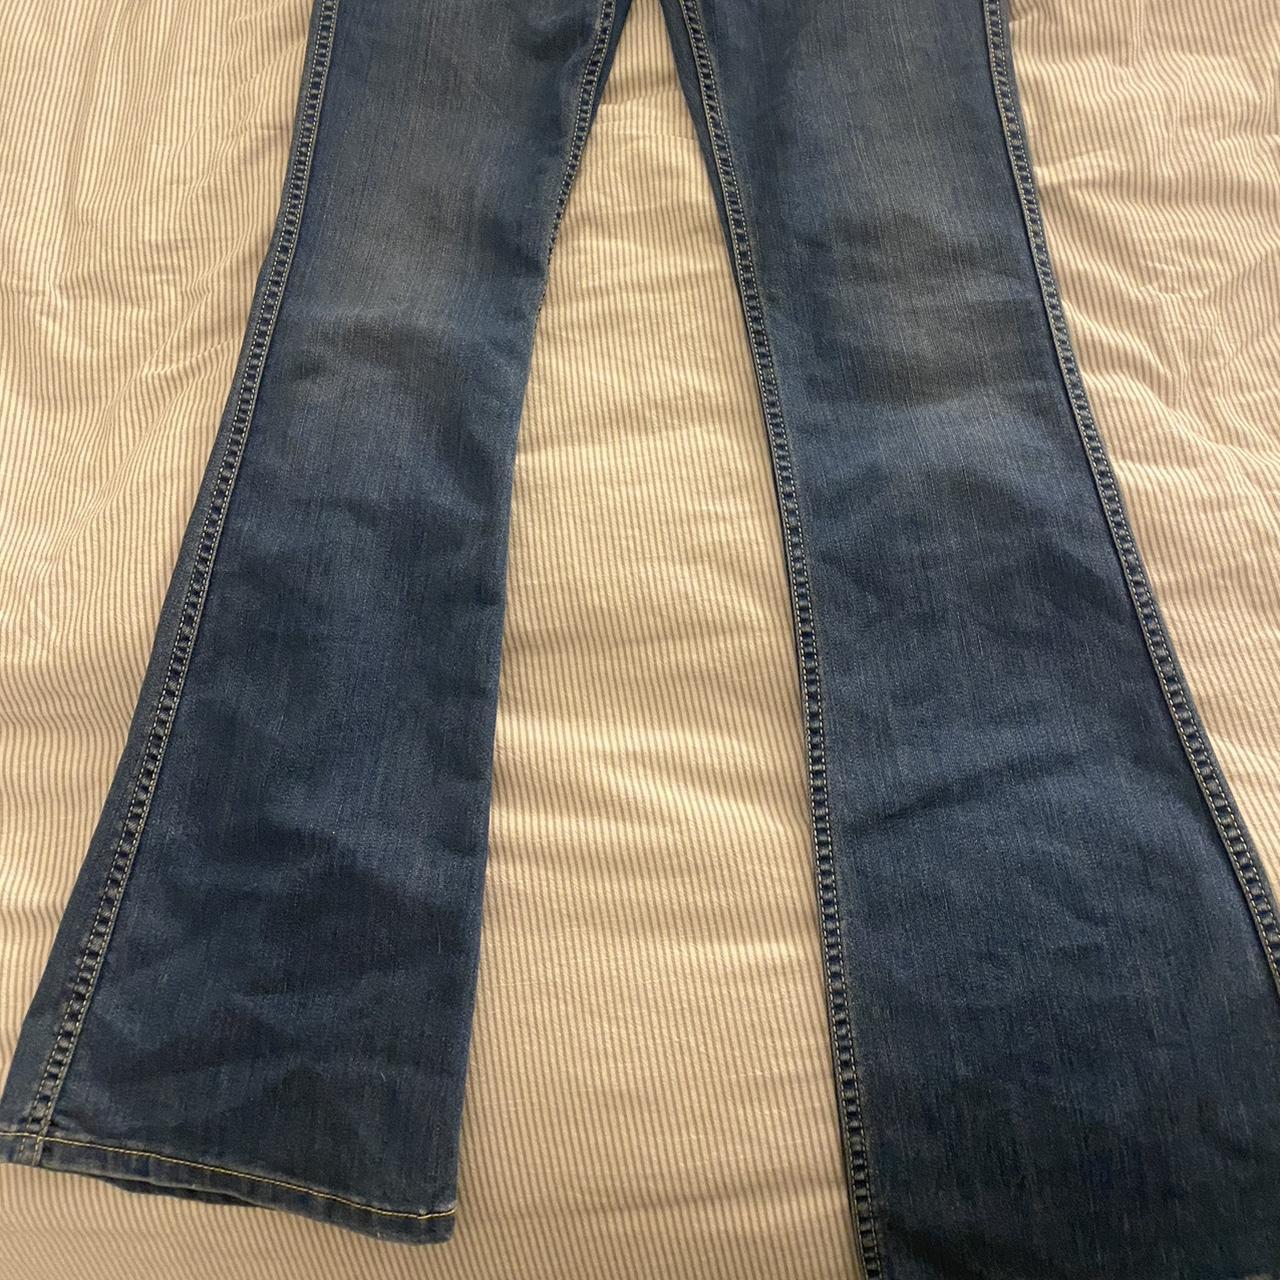 vintage low rise flared jeans from riders, size 9,... - Depop